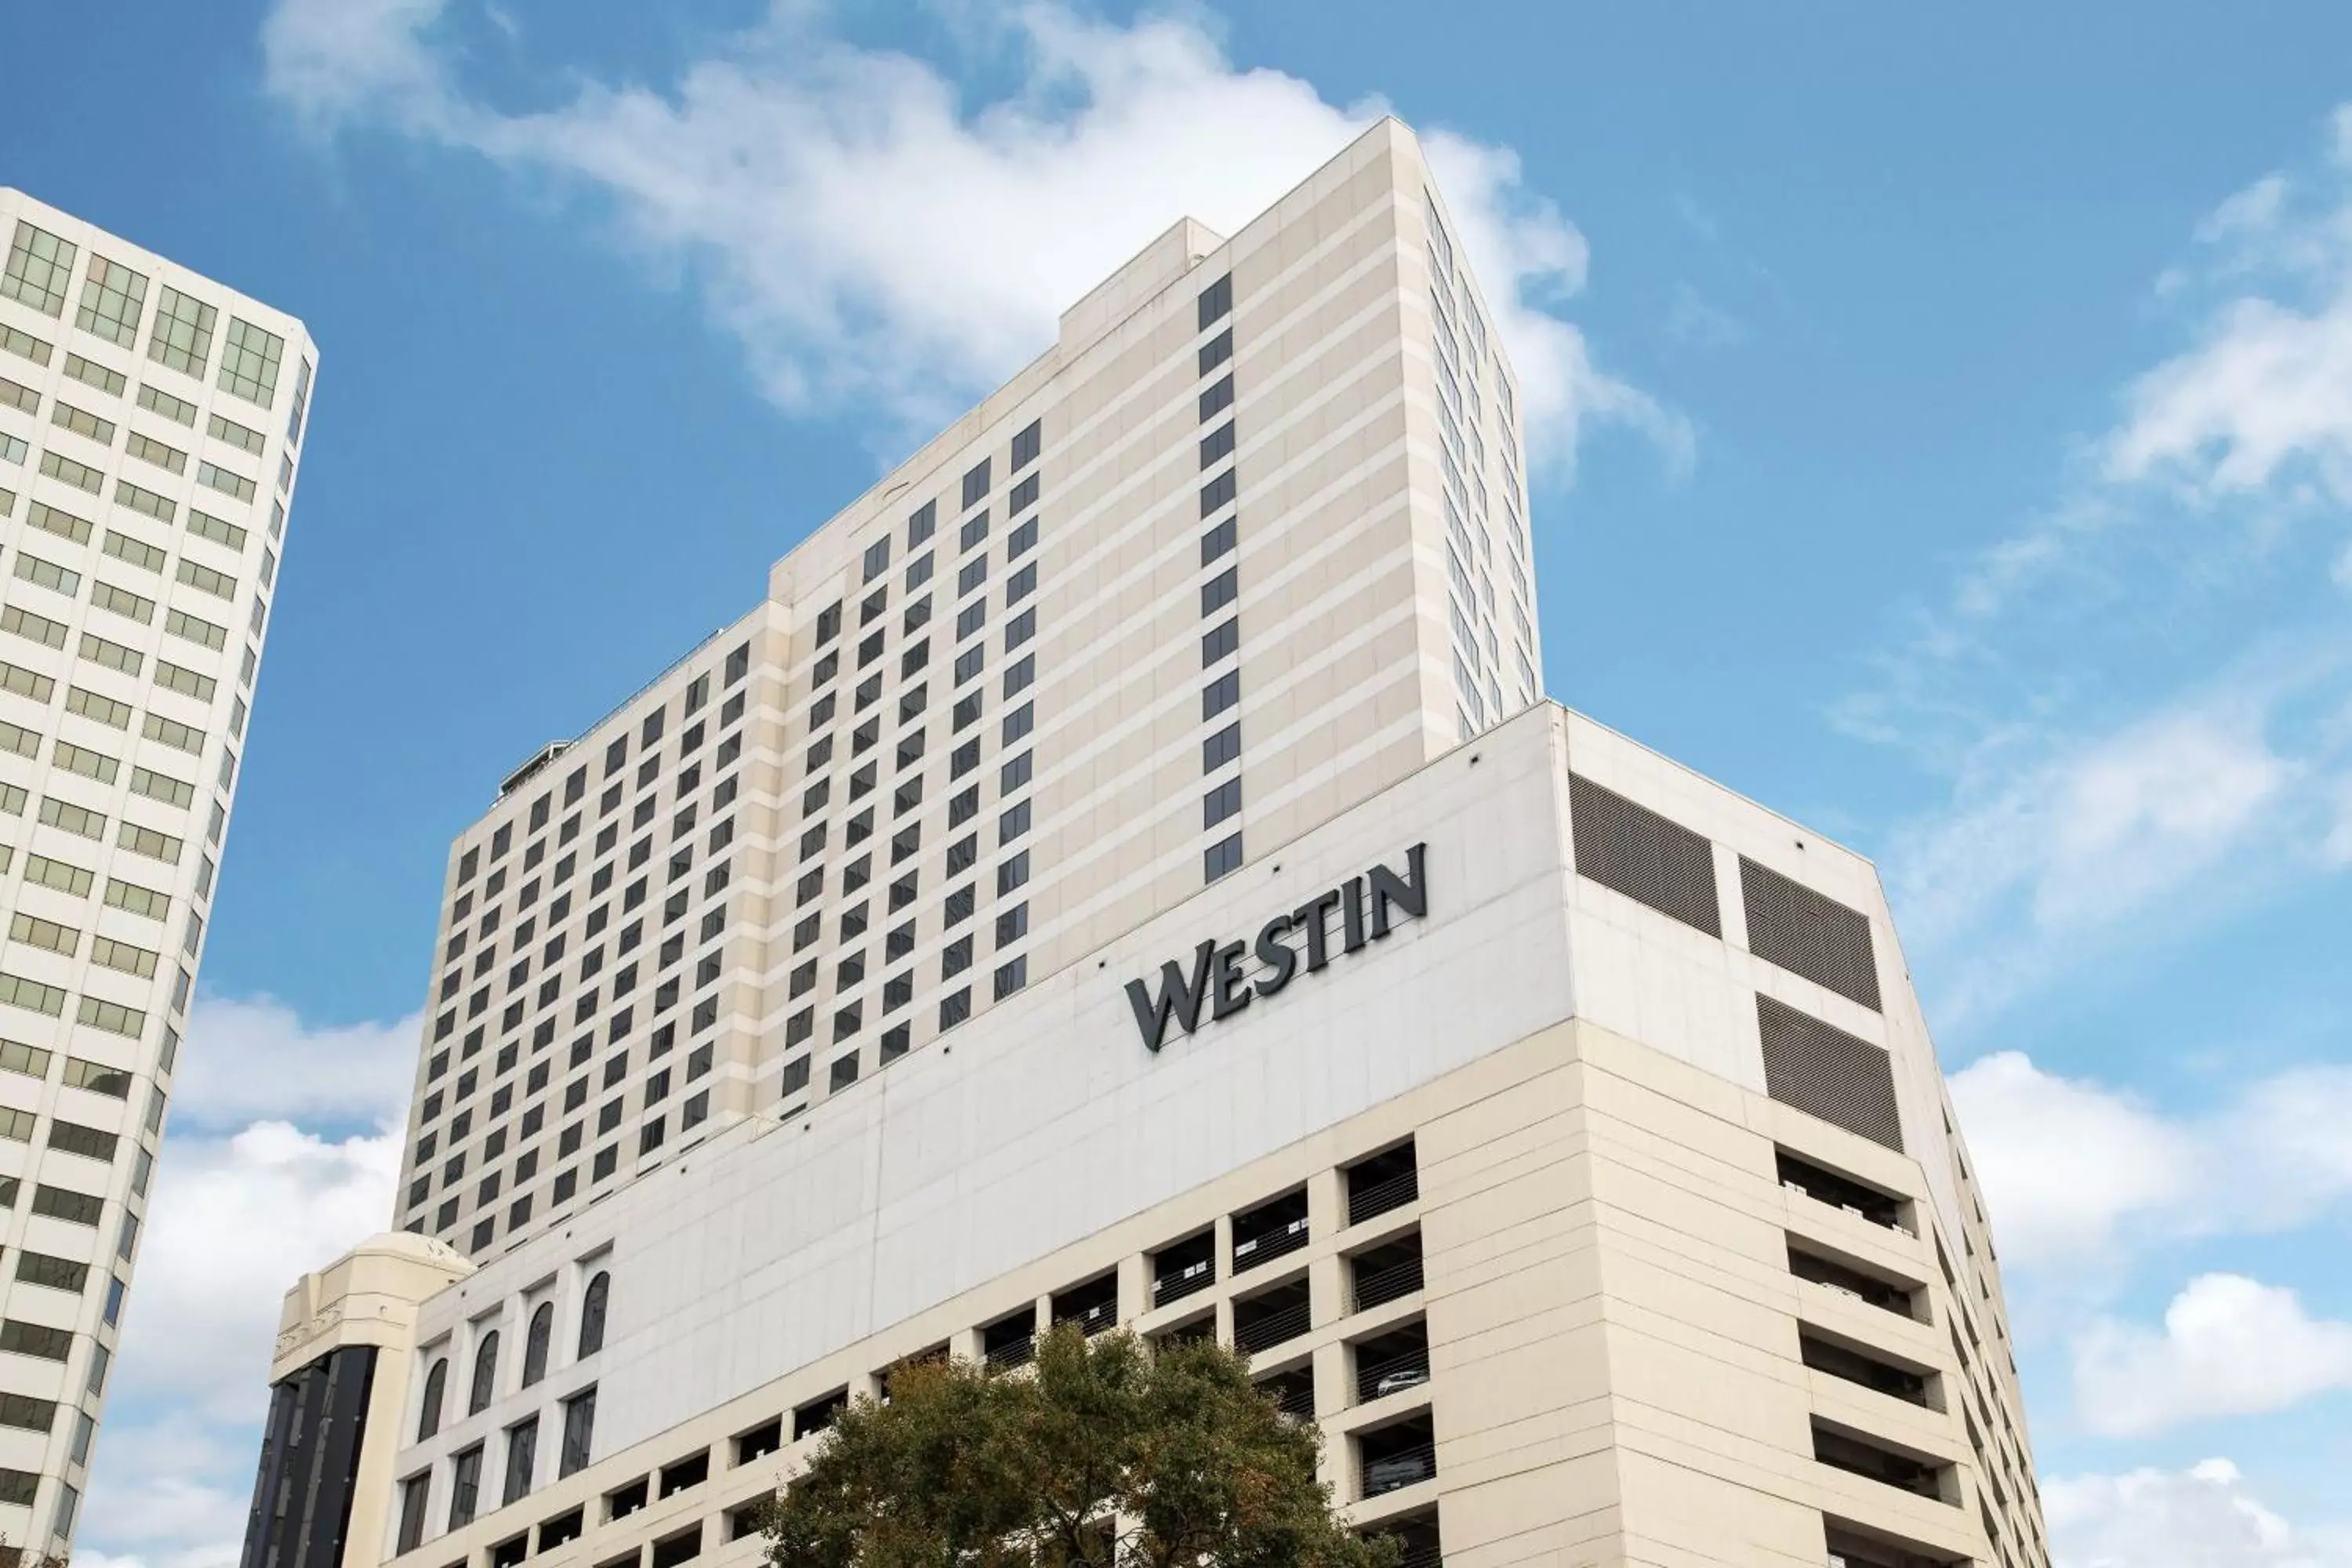 Property Building in The Westin New Orleans